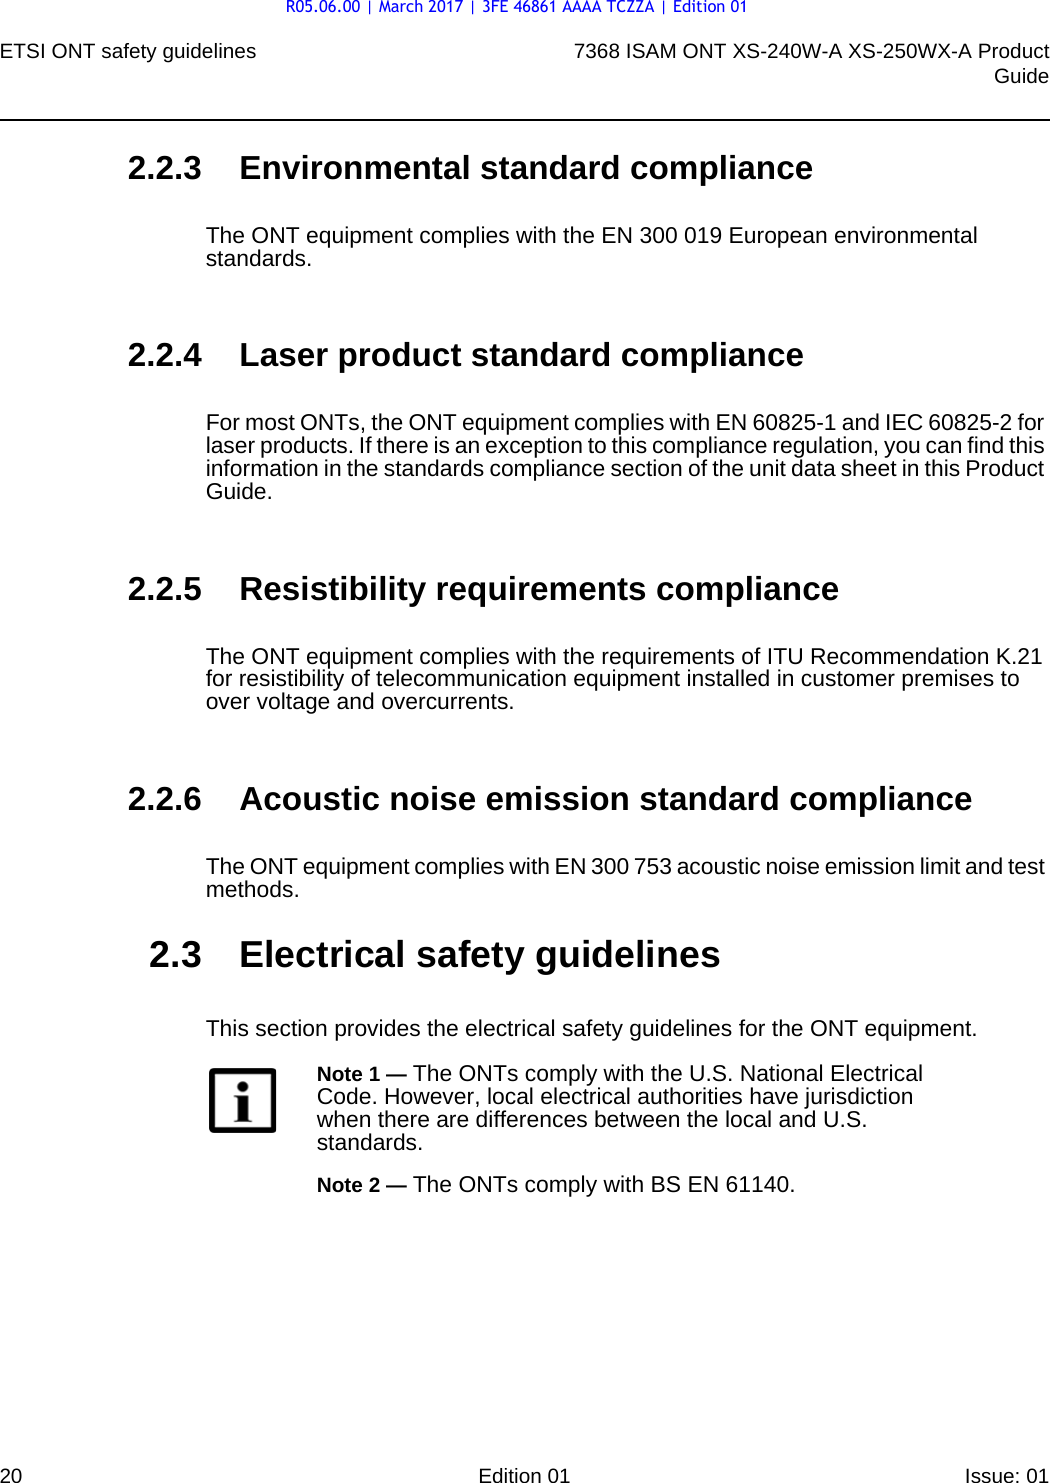 ETSI ONT safety guidelines207368 ISAM ONT XS-240W-A XS-250WX-A ProductGuideEdition 01 Issue: 01 2.2.3 Environmental standard complianceThe ONT equipment complies with the EN 300 019 European environmental standards.2.2.4 Laser product standard complianceFor most ONTs, the ONT equipment complies with EN 60825-1 and IEC 60825-2 for laser products. If there is an exception to this compliance regulation, you can find this information in the standards compliance section of the unit data sheet in this Product Guide.2.2.5 Resistibility requirements complianceThe ONT equipment complies with the requirements of ITU Recommendation K.21 for resistibility of telecommunication equipment installed in customer premises to over voltage and overcurrents.2.2.6 Acoustic noise emission standard complianceThe ONT equipment complies with EN 300 753 acoustic noise emission limit and test methods. 2.3 Electrical safety guidelinesThis section provides the electrical safety guidelines for the ONT equipment.Note 1 — The ONTs comply with the U.S. National Electrical Code. However, local electrical authorities have jurisdiction when there are differences between the local and U.S. standards.Note 2 — The ONTs comply with BS EN 61140.R05.06.00 | March 2017 | 3FE 46861 AAAA TCZZA | Edition 01